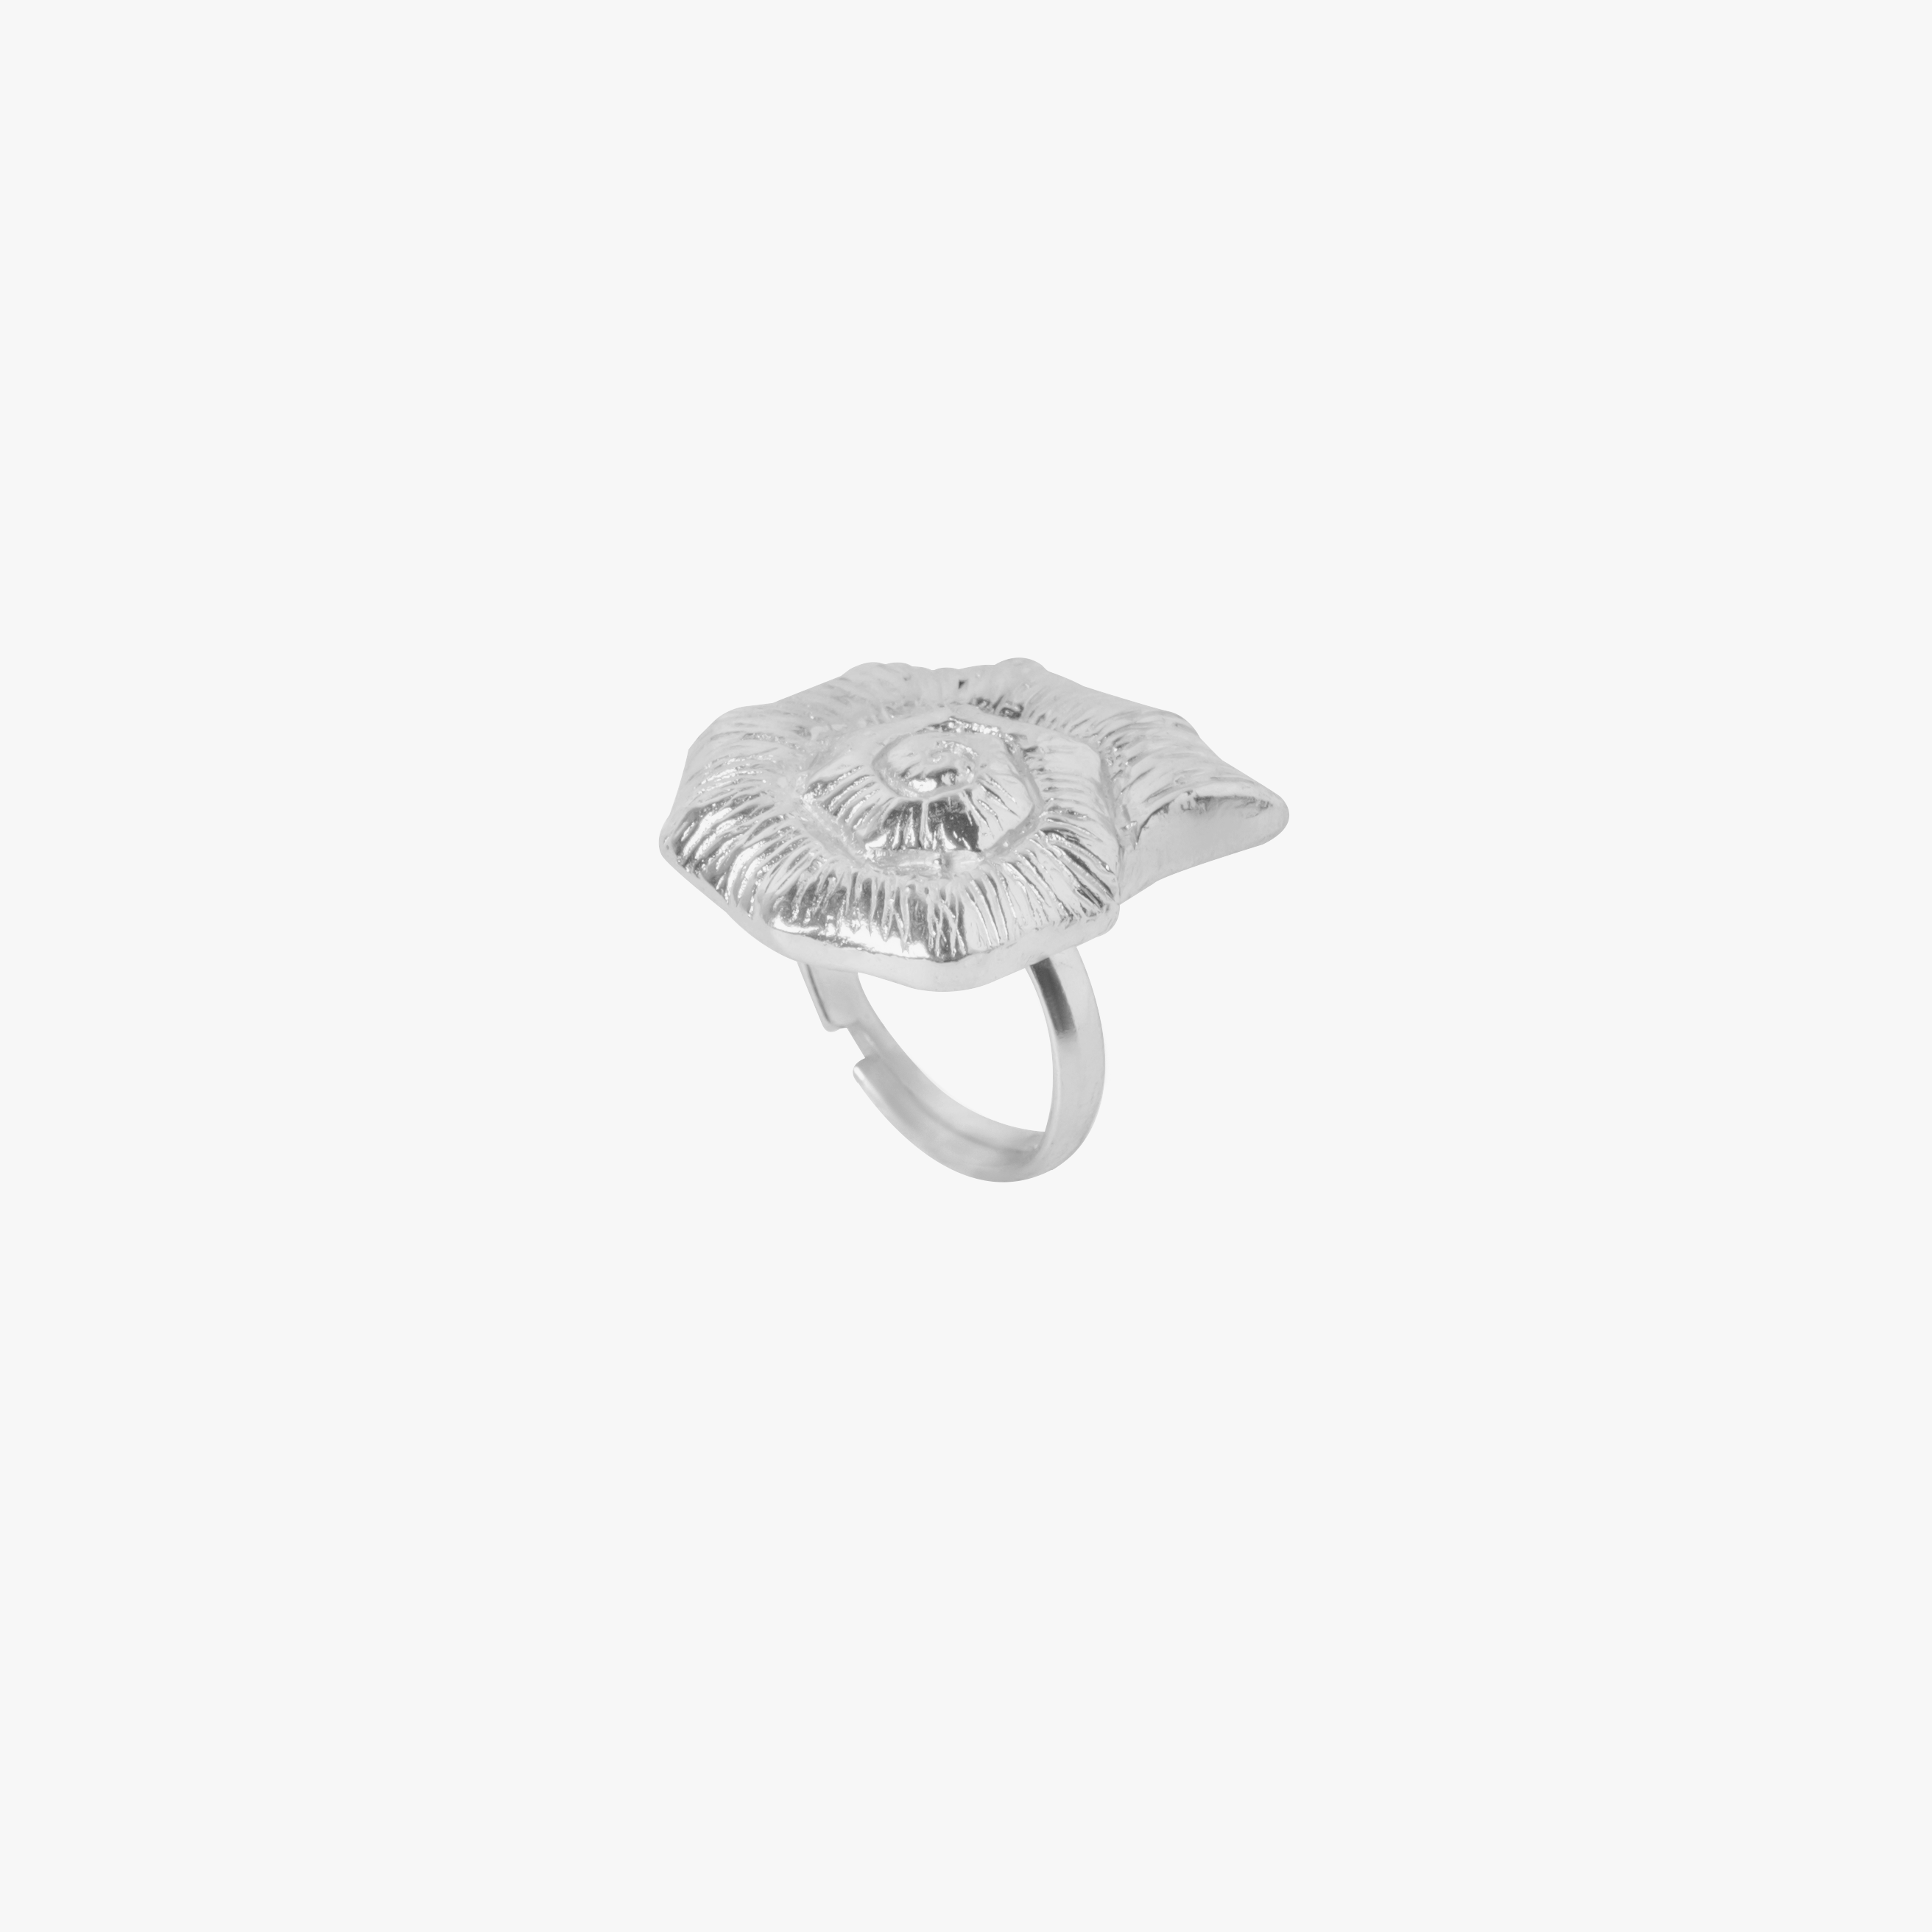 KNOBBED WHELK RING SILVER TONE, a product by Equiivalence